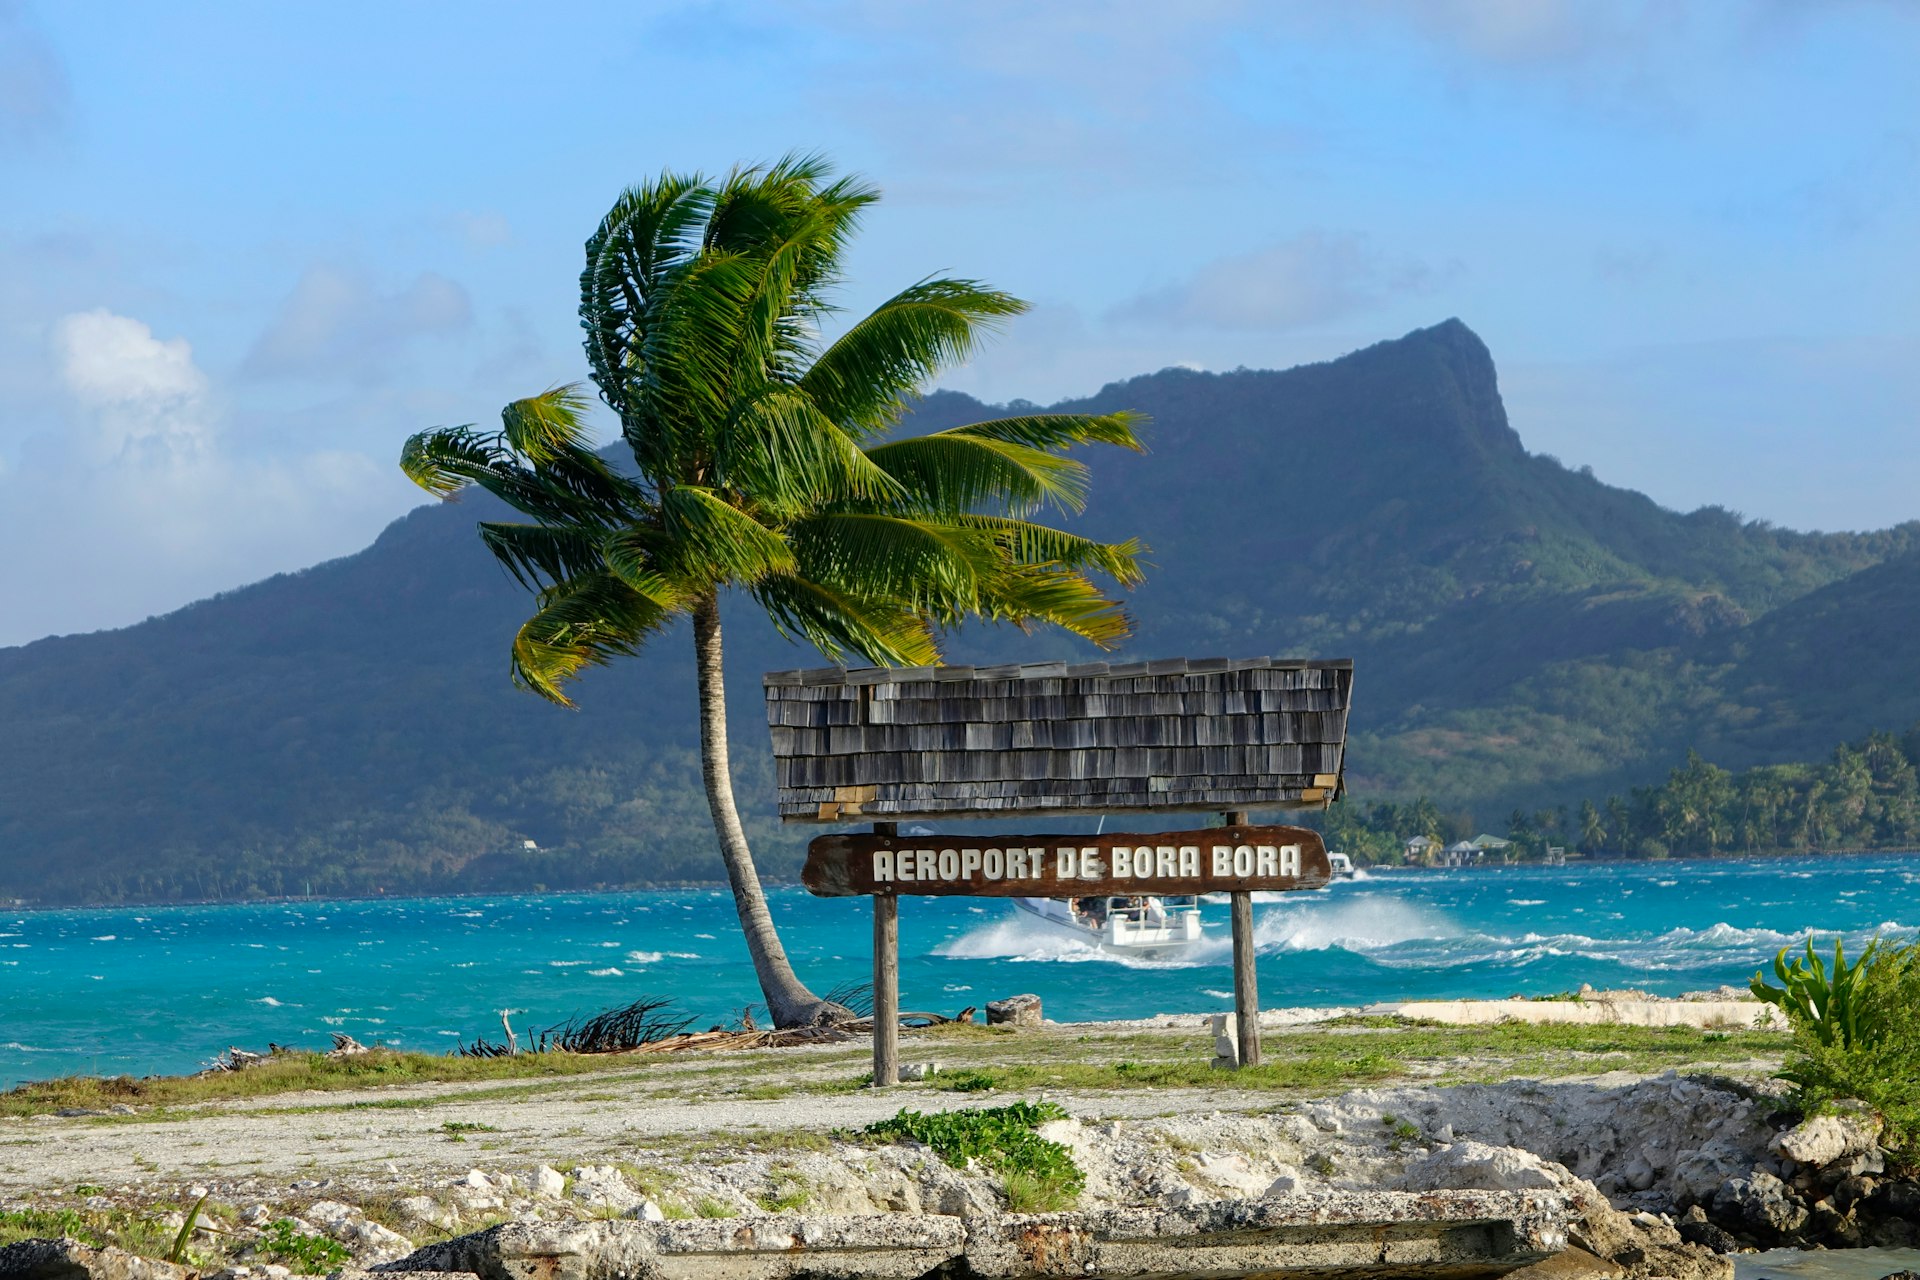 Strong summer wind blows past a lonely palm tree by a airport sign in Bora Bora.